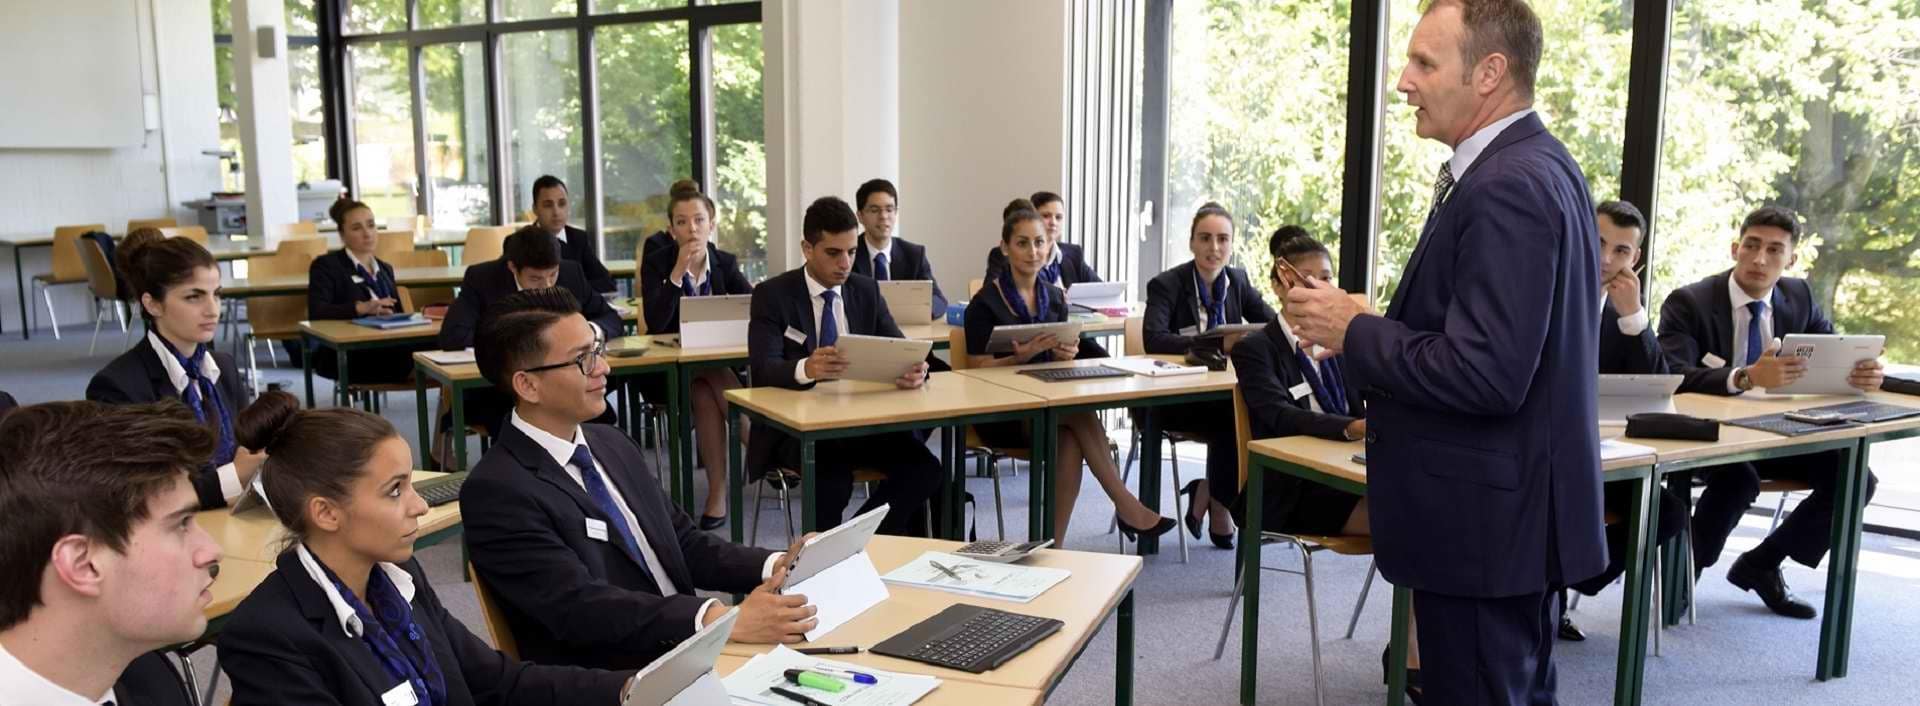 In our Swiss Hotel Management School our Hospitality Degree Program provide you a choice between 2 & 3 years cursus.